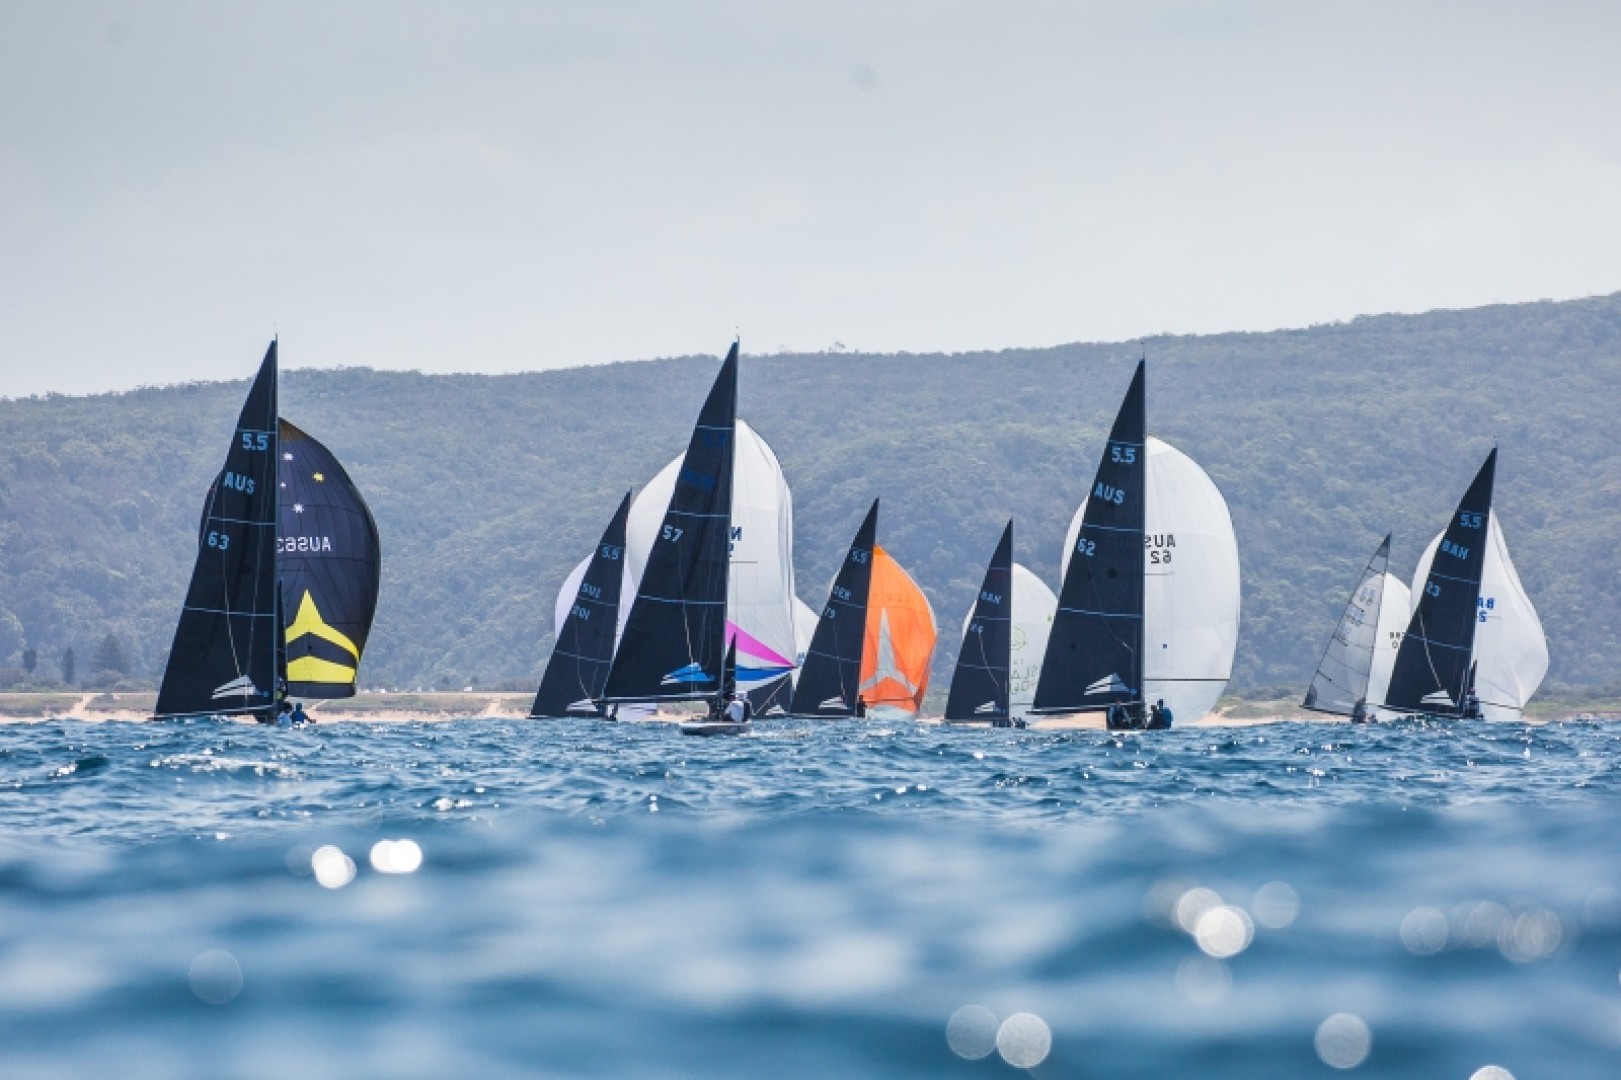 10 days of racing await the 5.5 Metre fleet gathered in Porto Cervo, including the Class World Championship. 

Photo credit: Robert Deaves